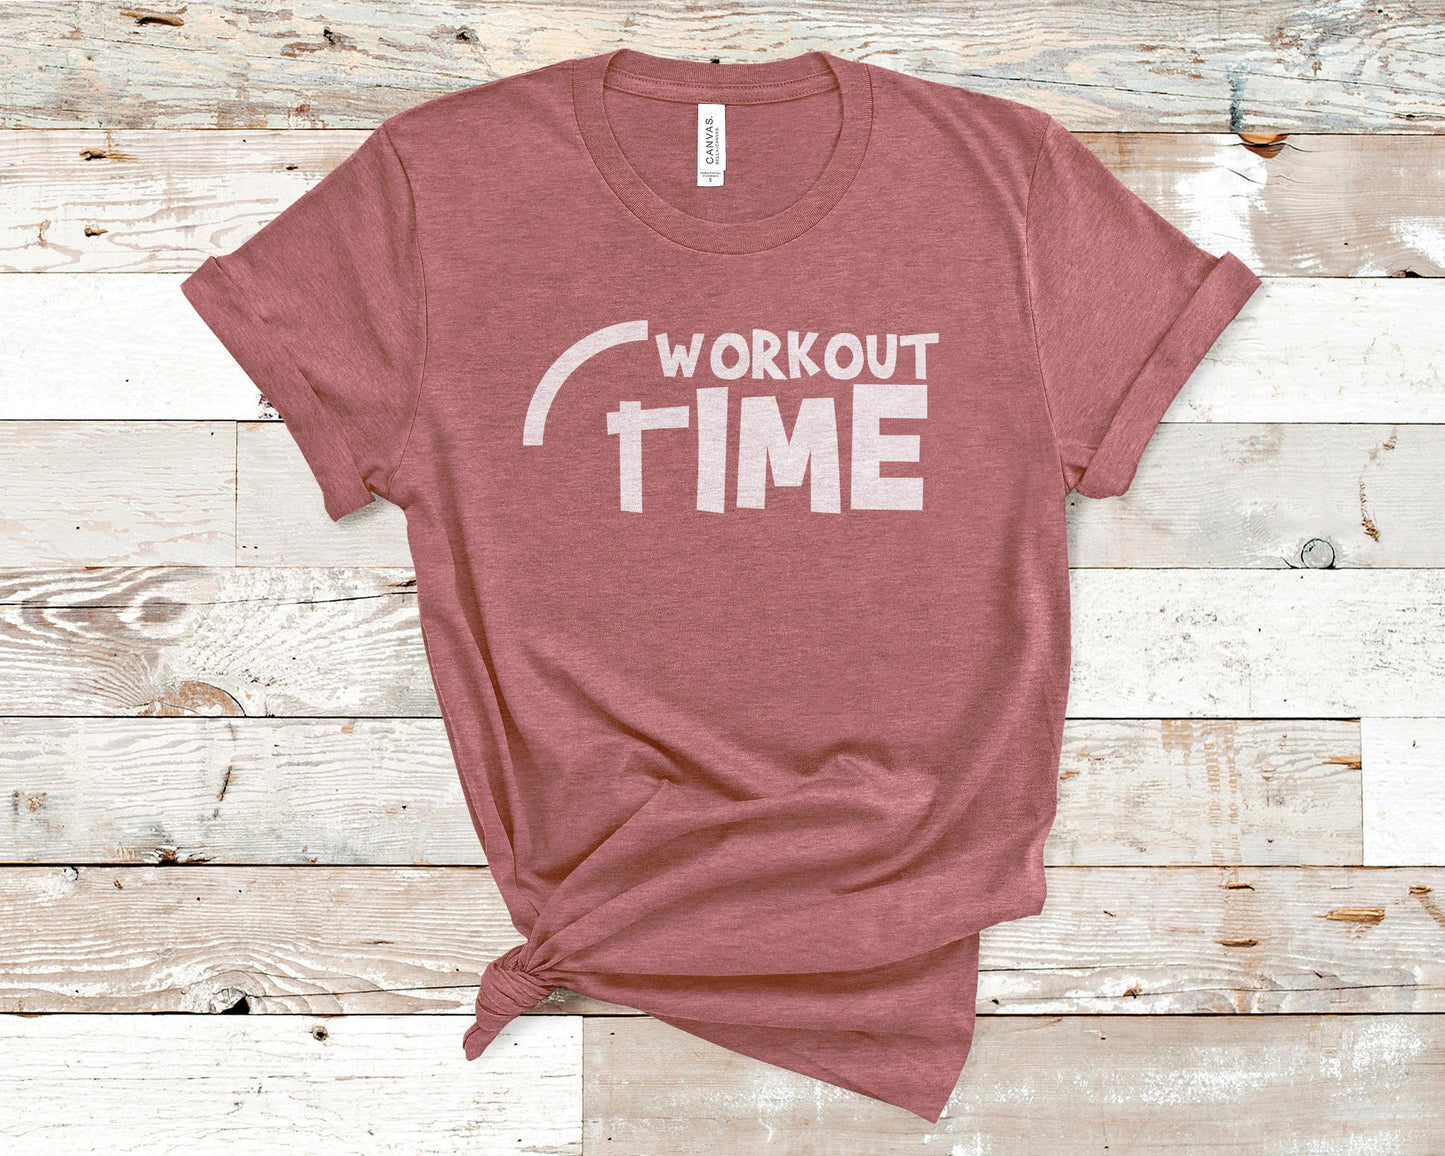 Workout Time - Fitness Shirt